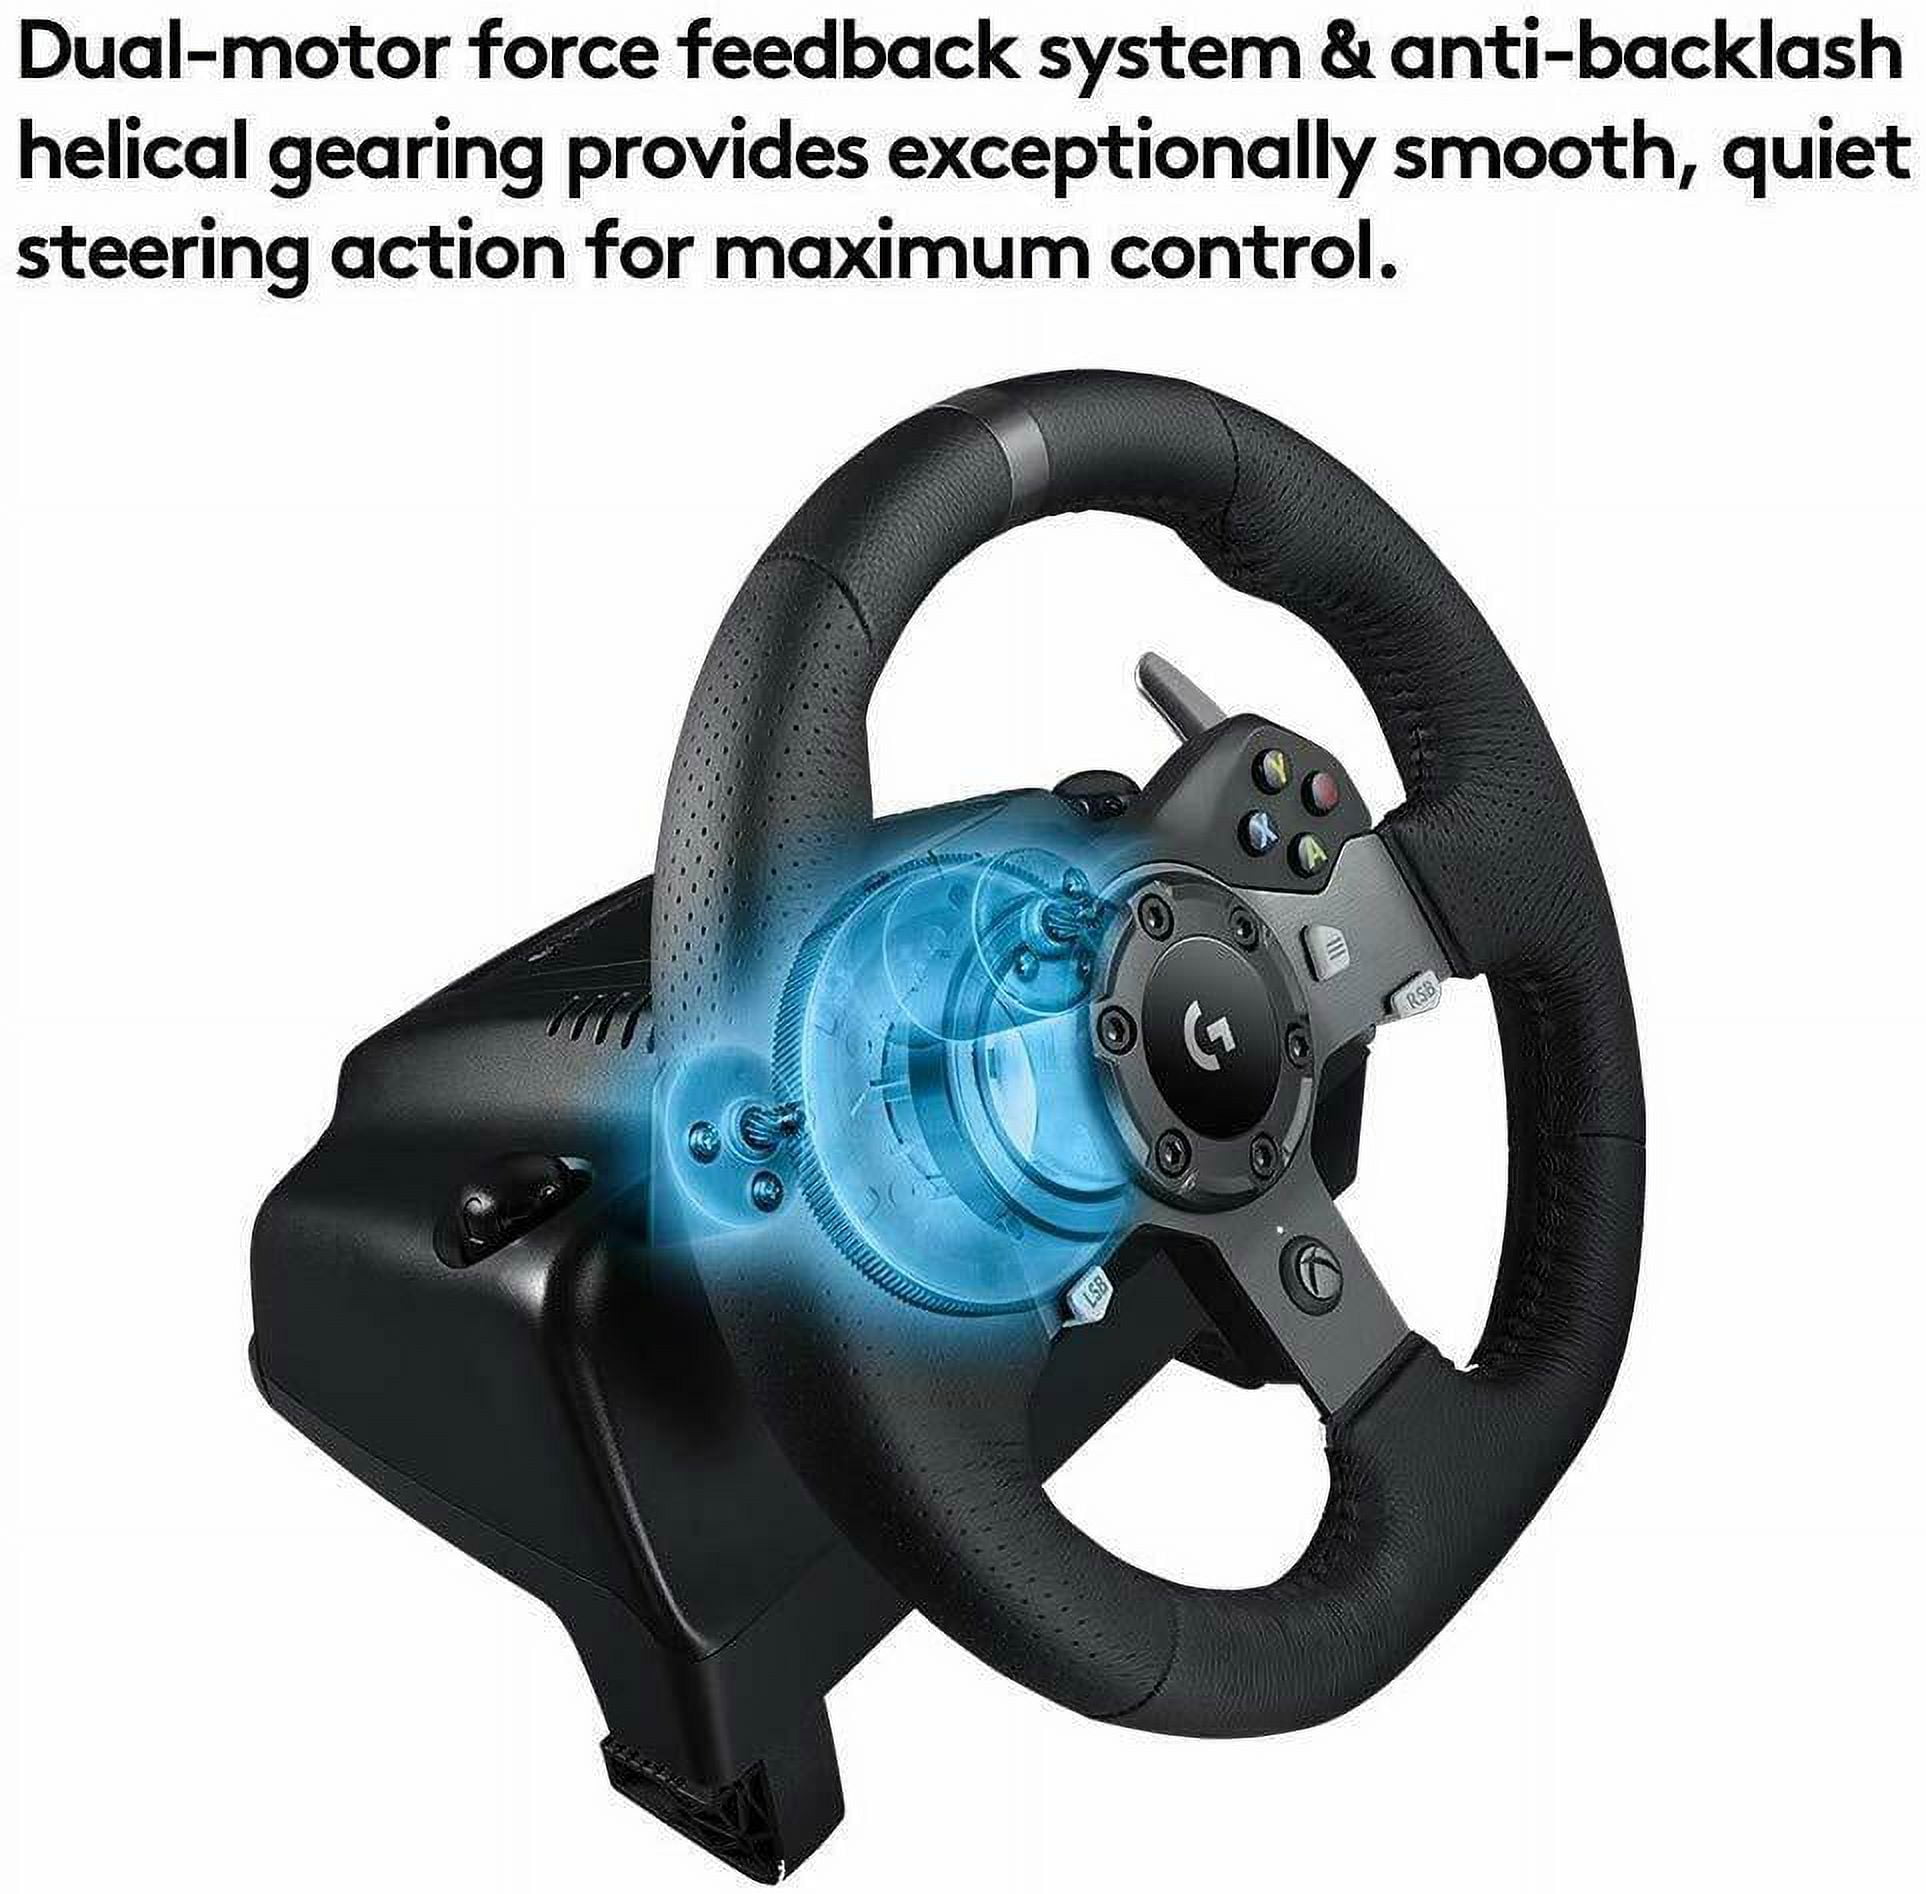 Logitech G920 Xbox Driving Force Racing Wheel for Xbox One and PC 